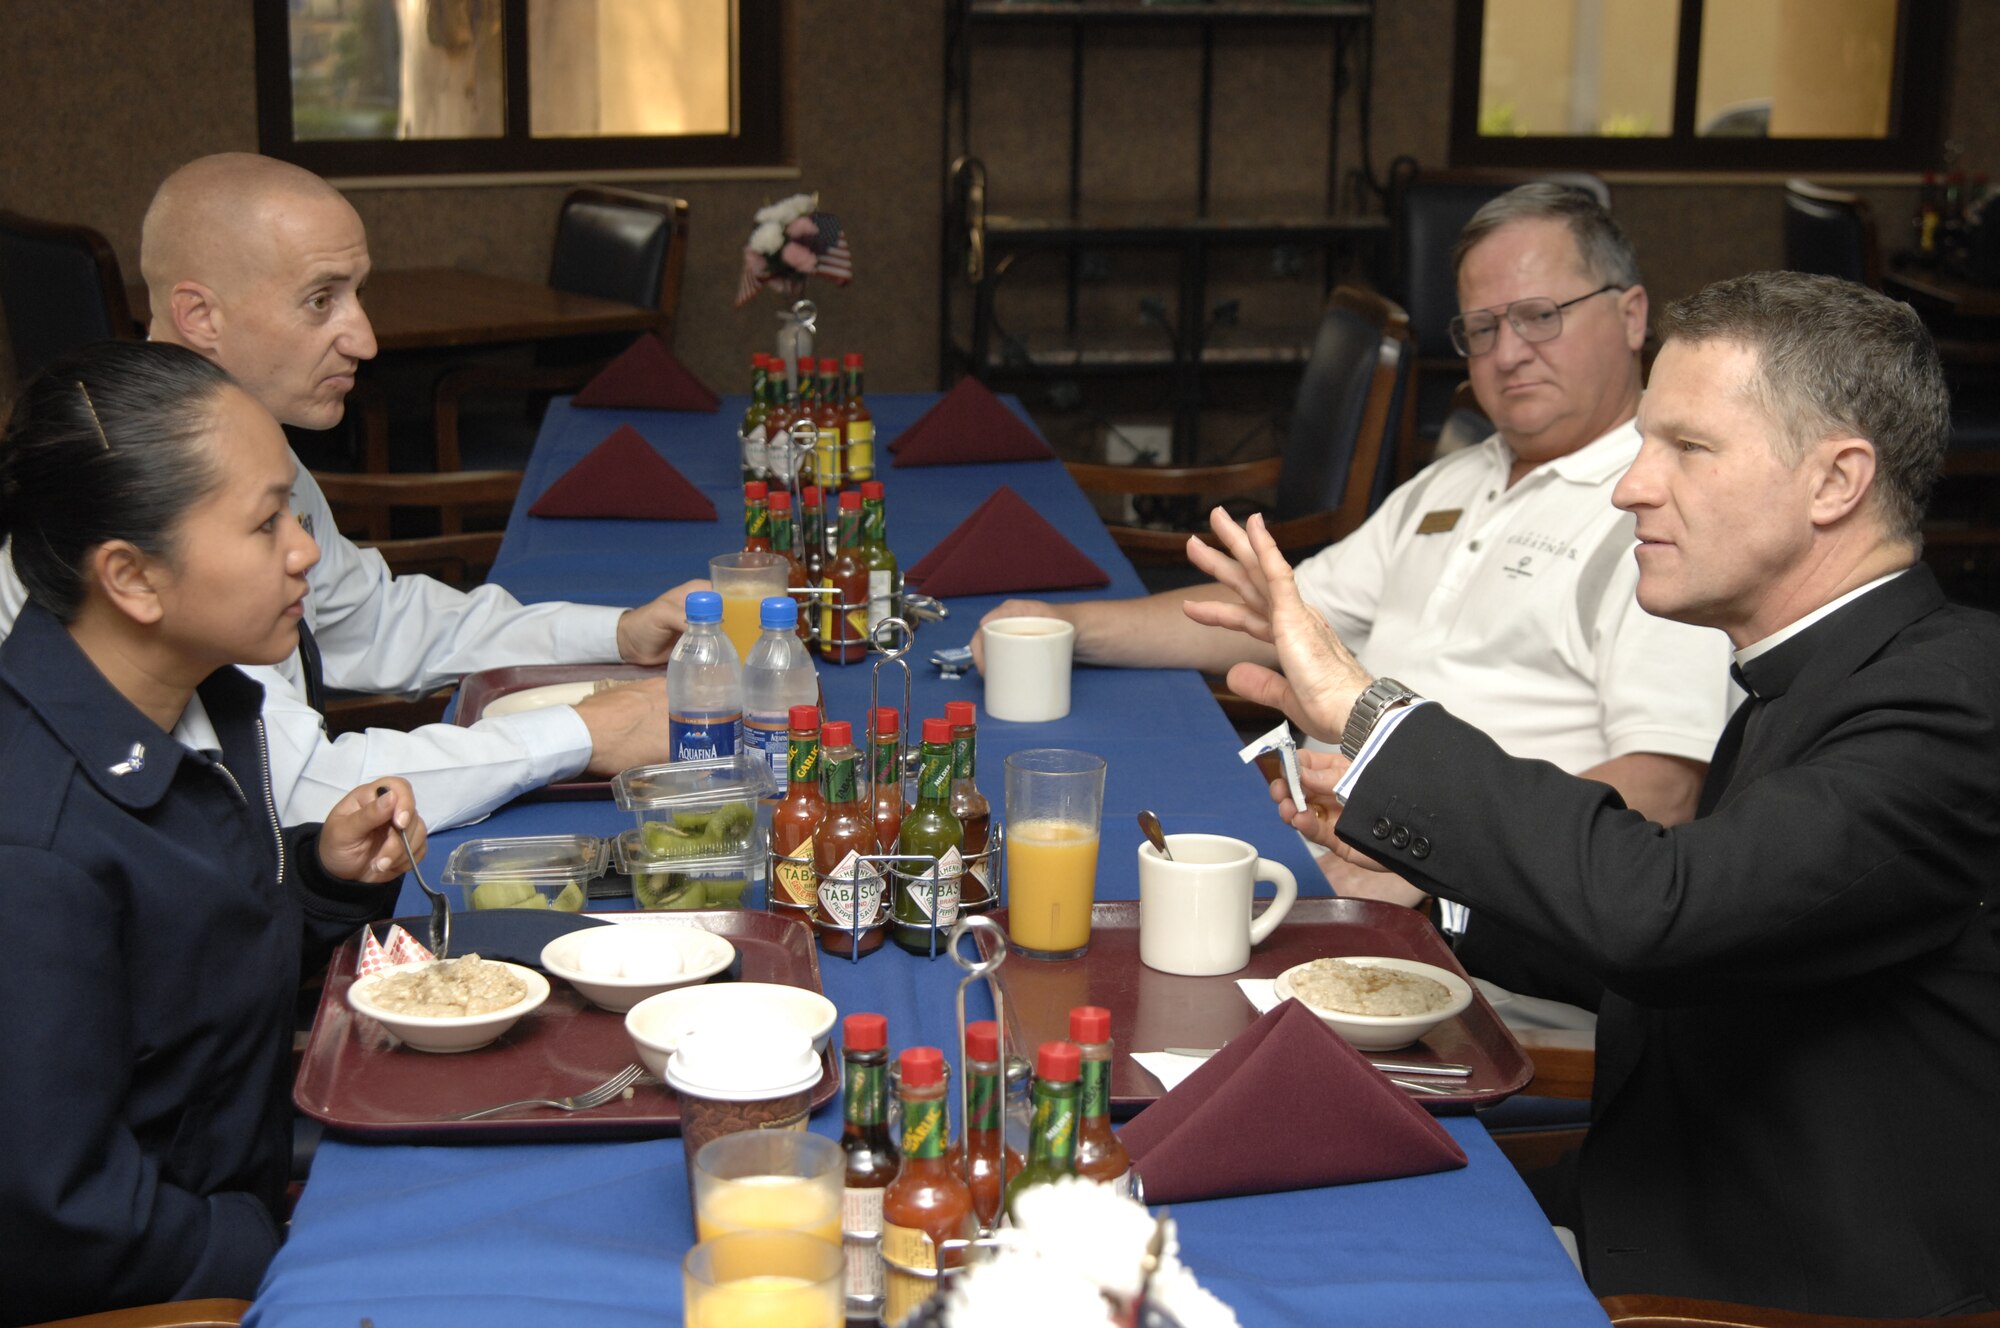 Roman Catholic Archbishop of Military Services USA Timothy Broglio speaks with (from left) Airman 1st Class Marilyn Ballester, 39th Logistics Readiness Squadron, Tech. Sgt. Kenneth Paul, 39 LRS, and Bill Schueller, Education office, during a breakfast at the Incirlik Sultan’s Inn dining facility, April 27. Archbishop Broglio visited Incirlik as part of his tour of U.S. military bases, which took him to South Korea for Christmas and Iraq for Easter. The Archbishop is in charge of the largest diocese in the Roman Catholic Church estimated to contain 1.5 million parishioners made up of military personnel worldwide and Department of Defense civilians serving overseas. (U.S. Air Force photo/Senior Airman Benjamin Wilson)